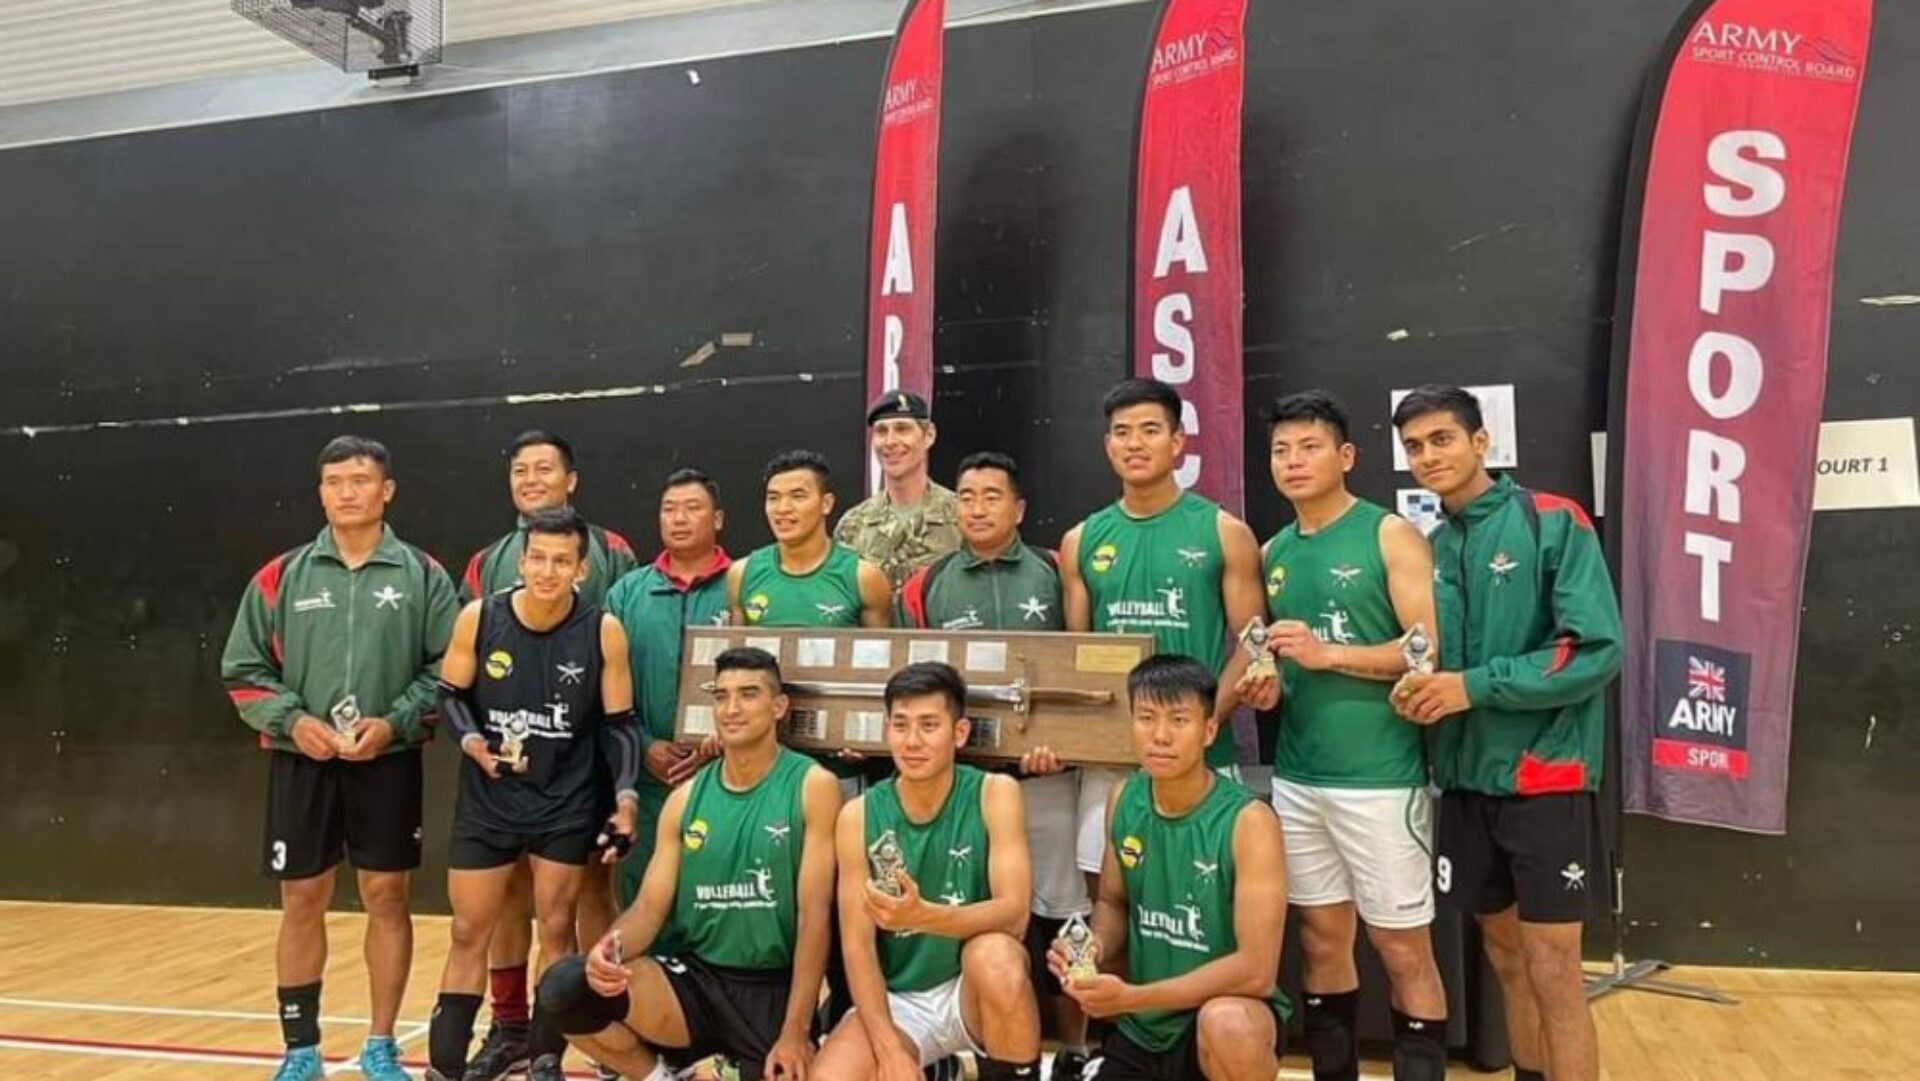 1 RGR win the Army Inter Unit Volleyball Competition